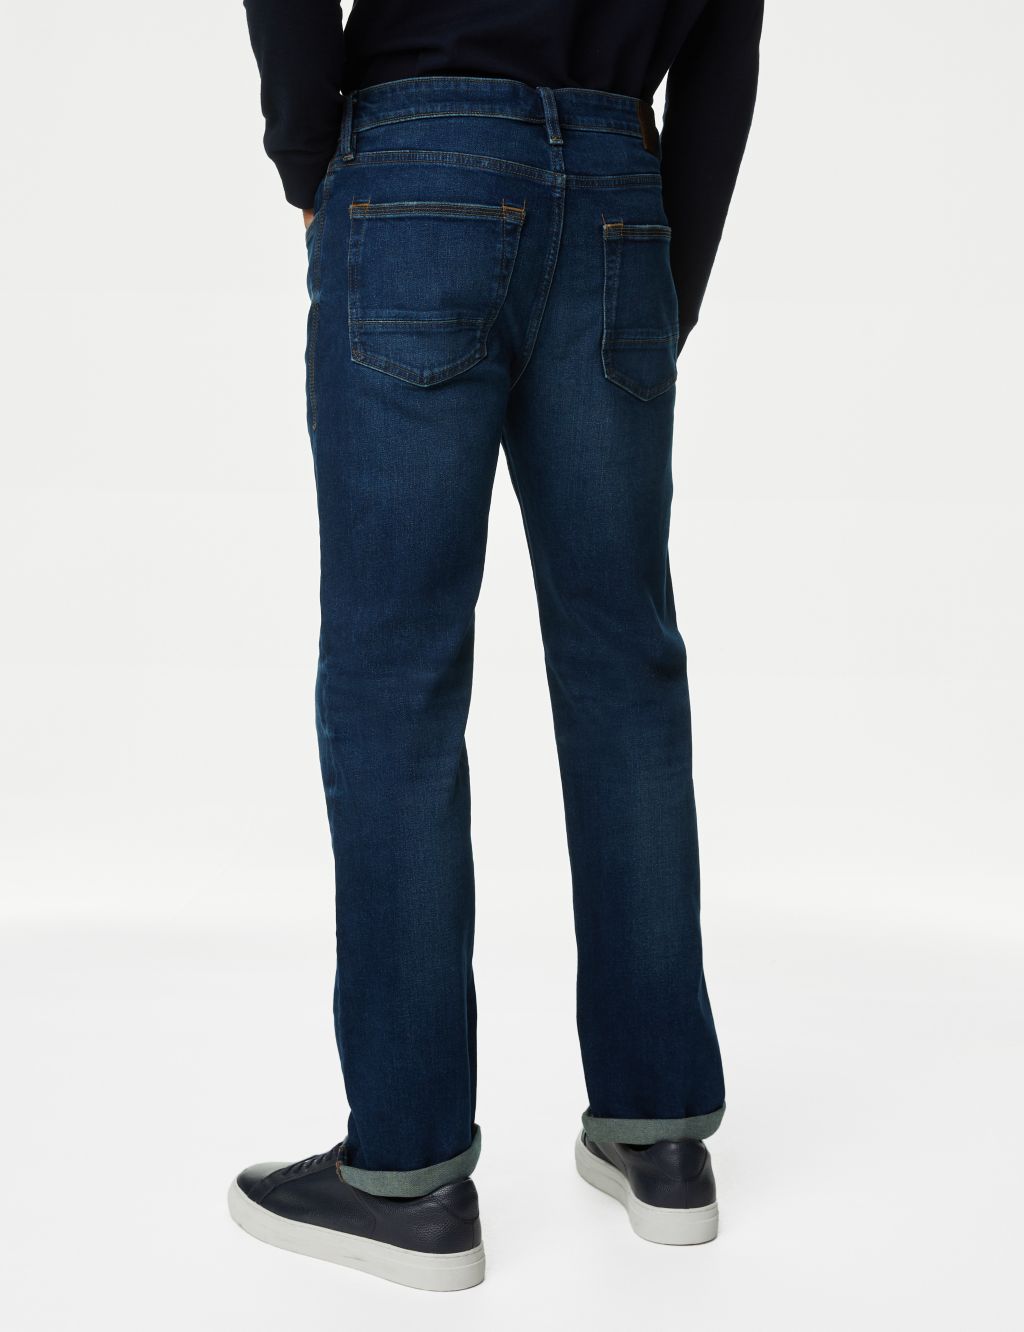 Straight Fit Vintage Wash Stretch Jeans image 4